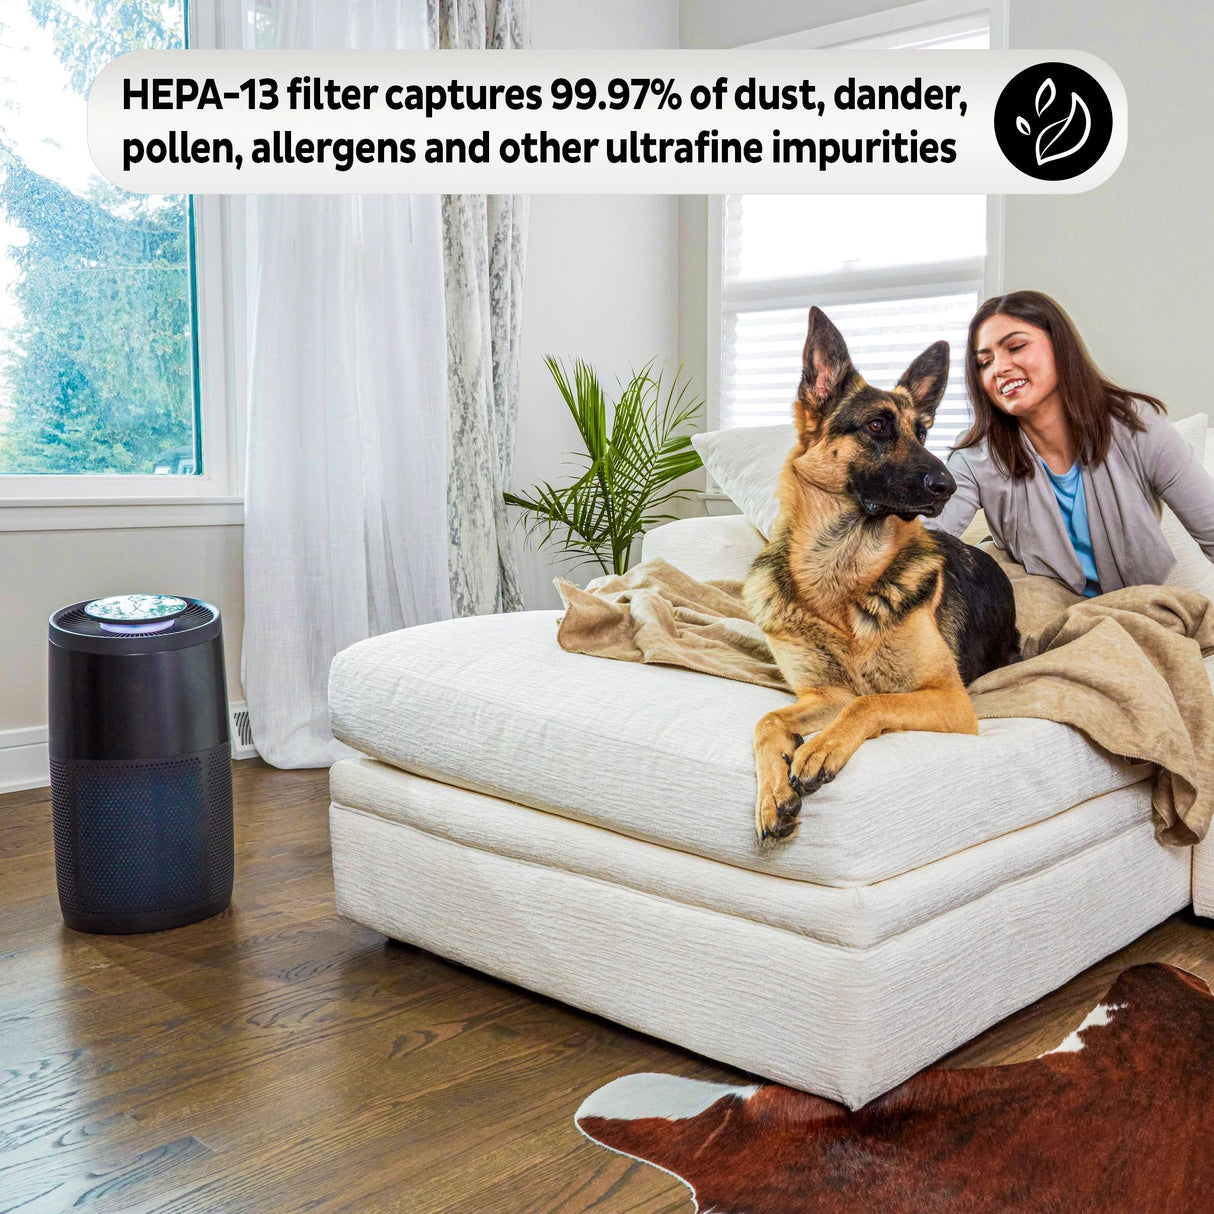  Instant Air Purifier, Large, Charcoal in the livingroom with dog on bed